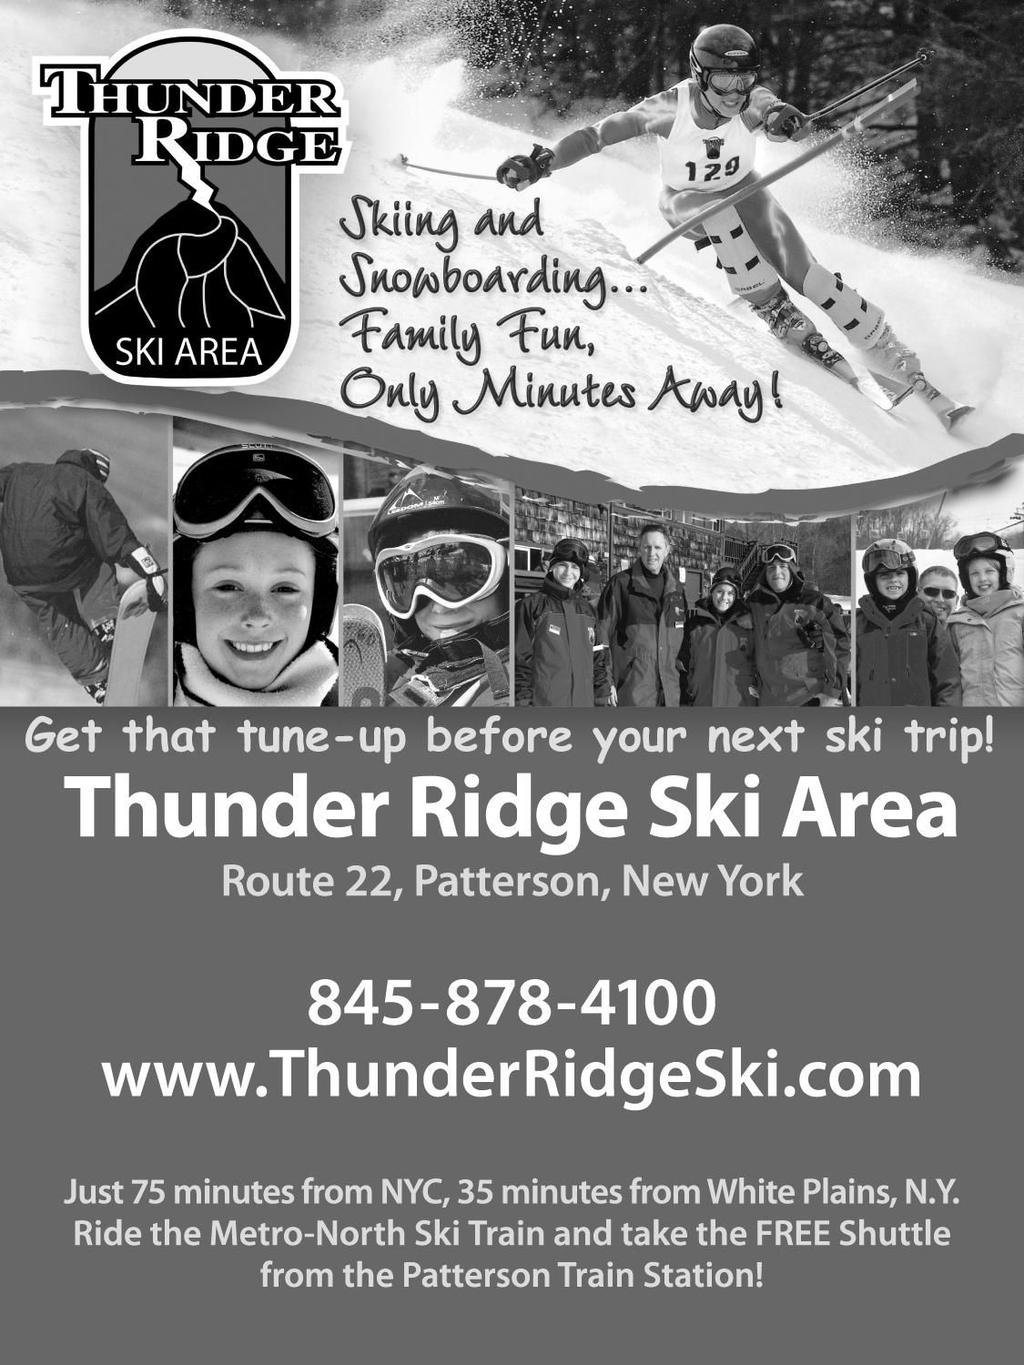 Page 6 Ski Club Week February 10 13 $350* Trip Leader: Mark Searle - Sign up September 18 4 day lift ticket/3 nights lodging at the Grand Summit Ski in/ski out Full Breakfast Buffet Daily Ski club